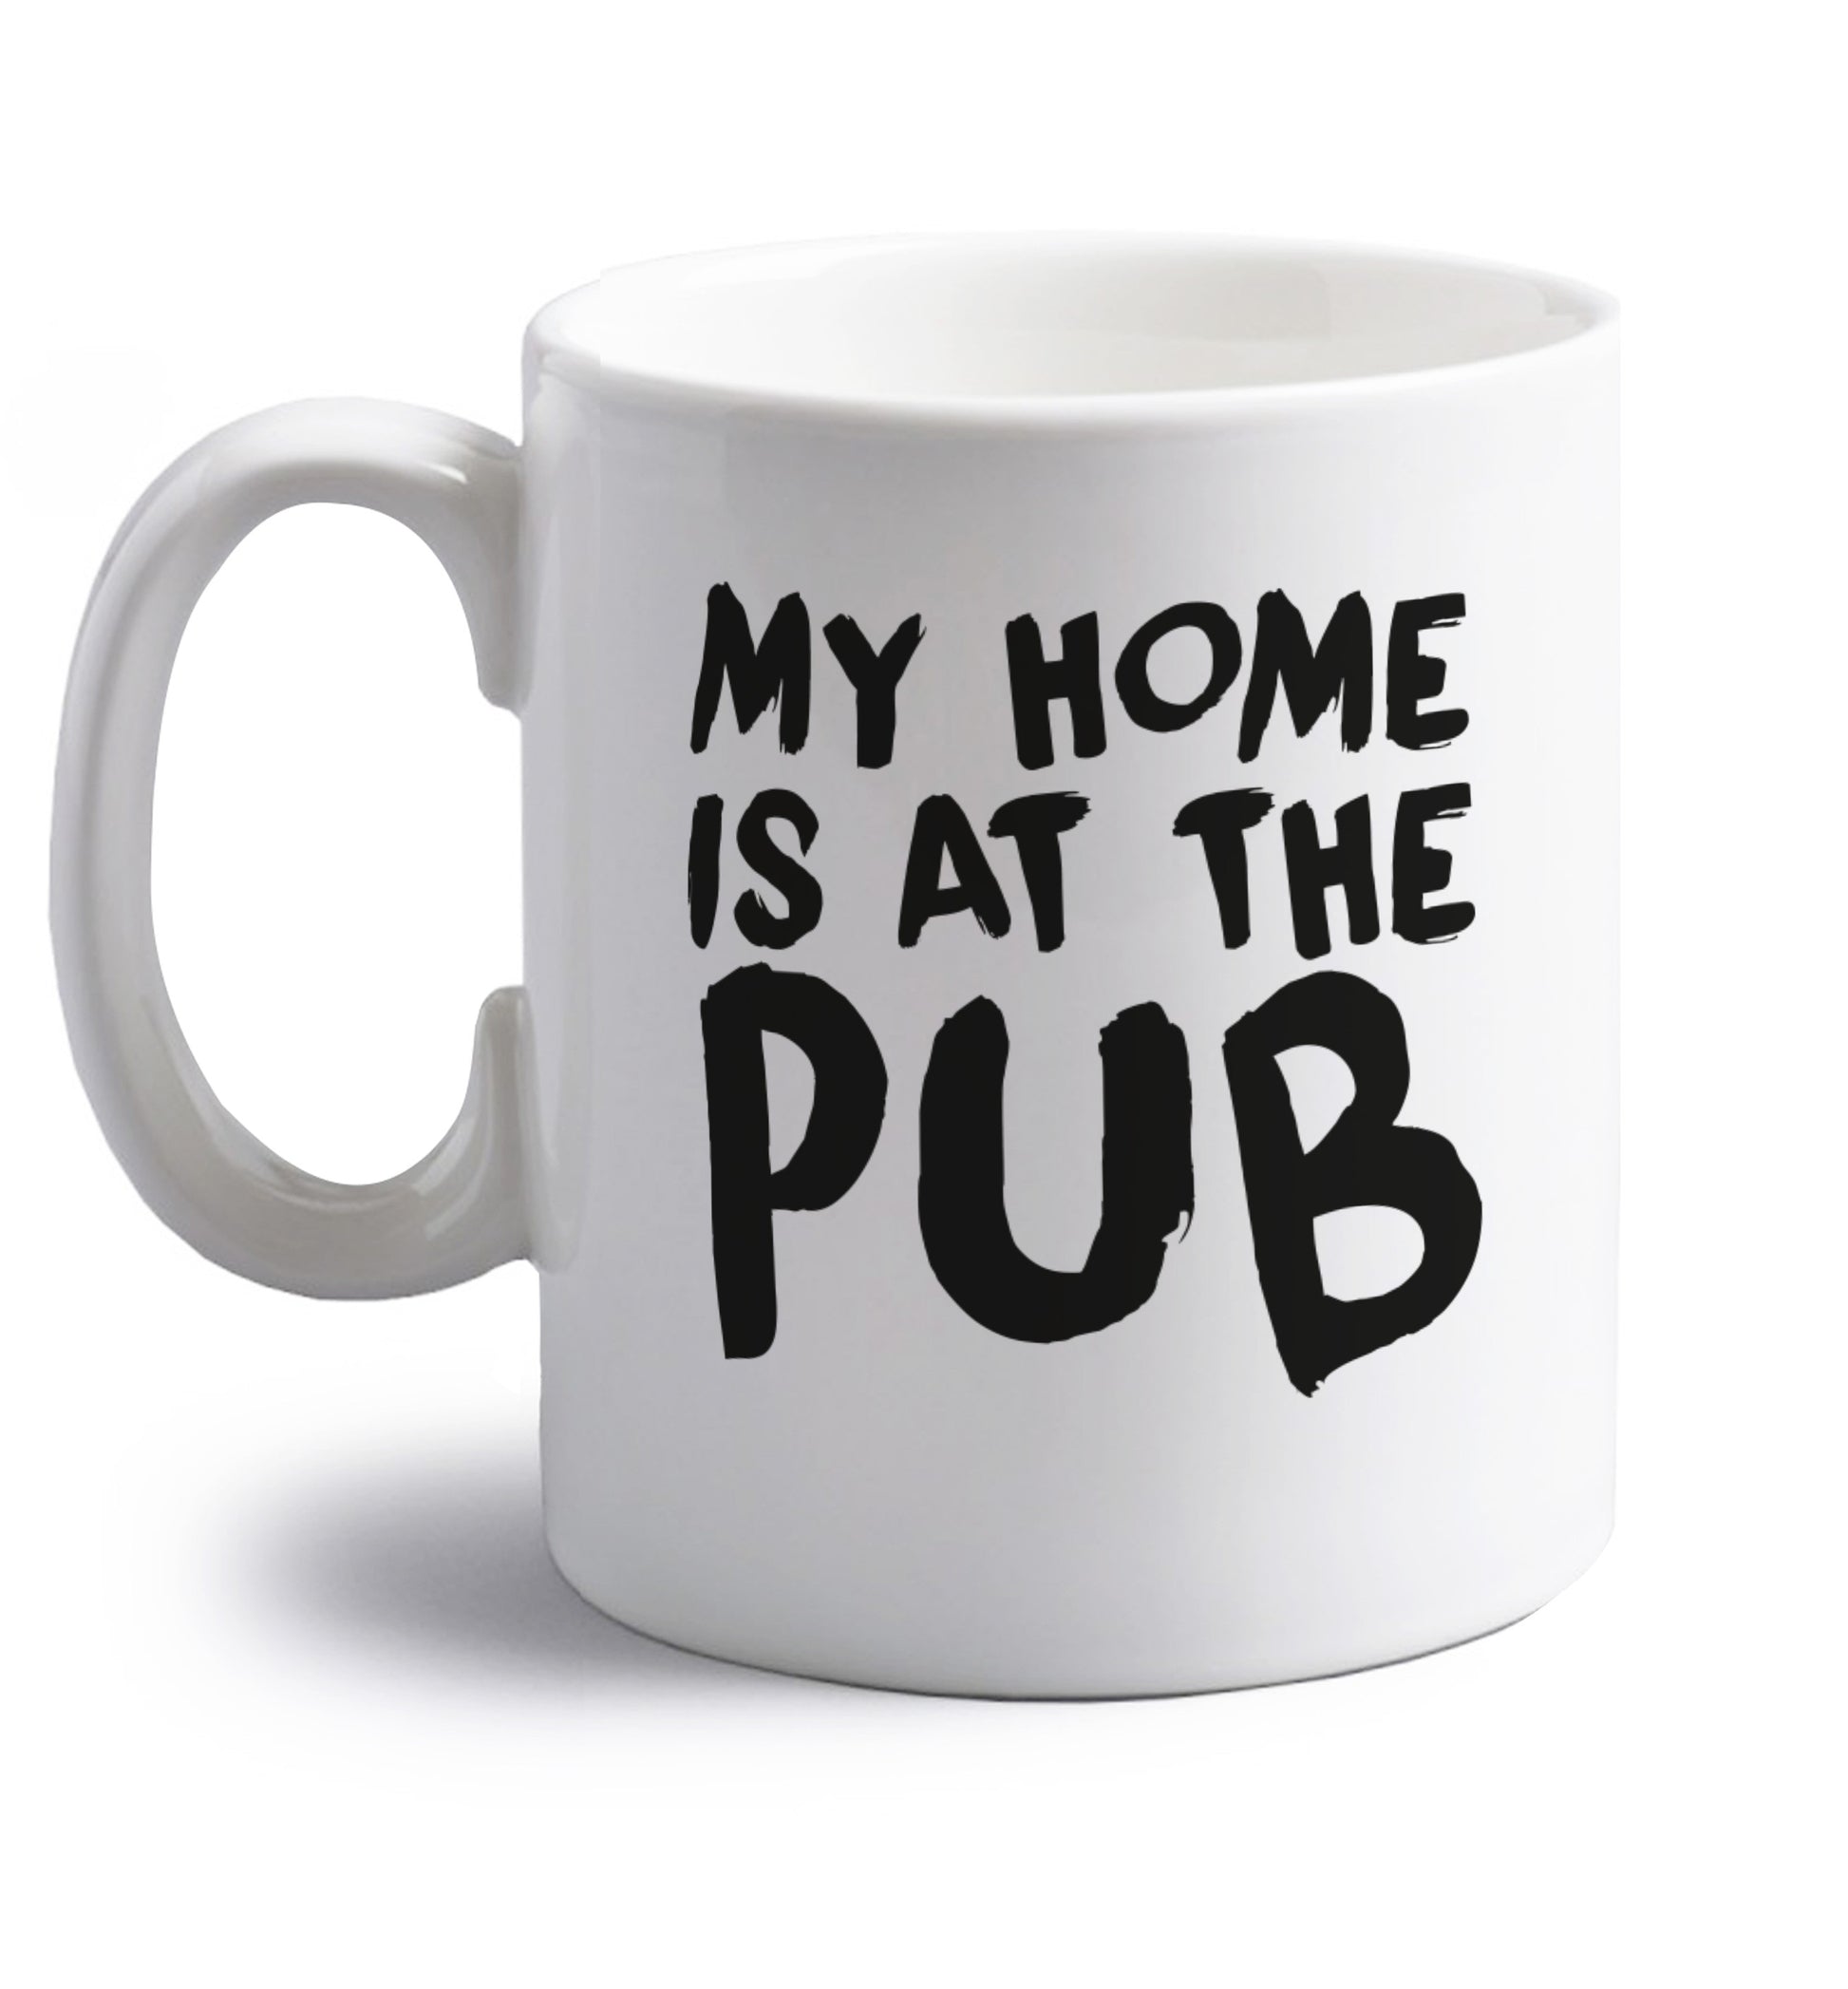 My home is at the pub right handed white ceramic mug 